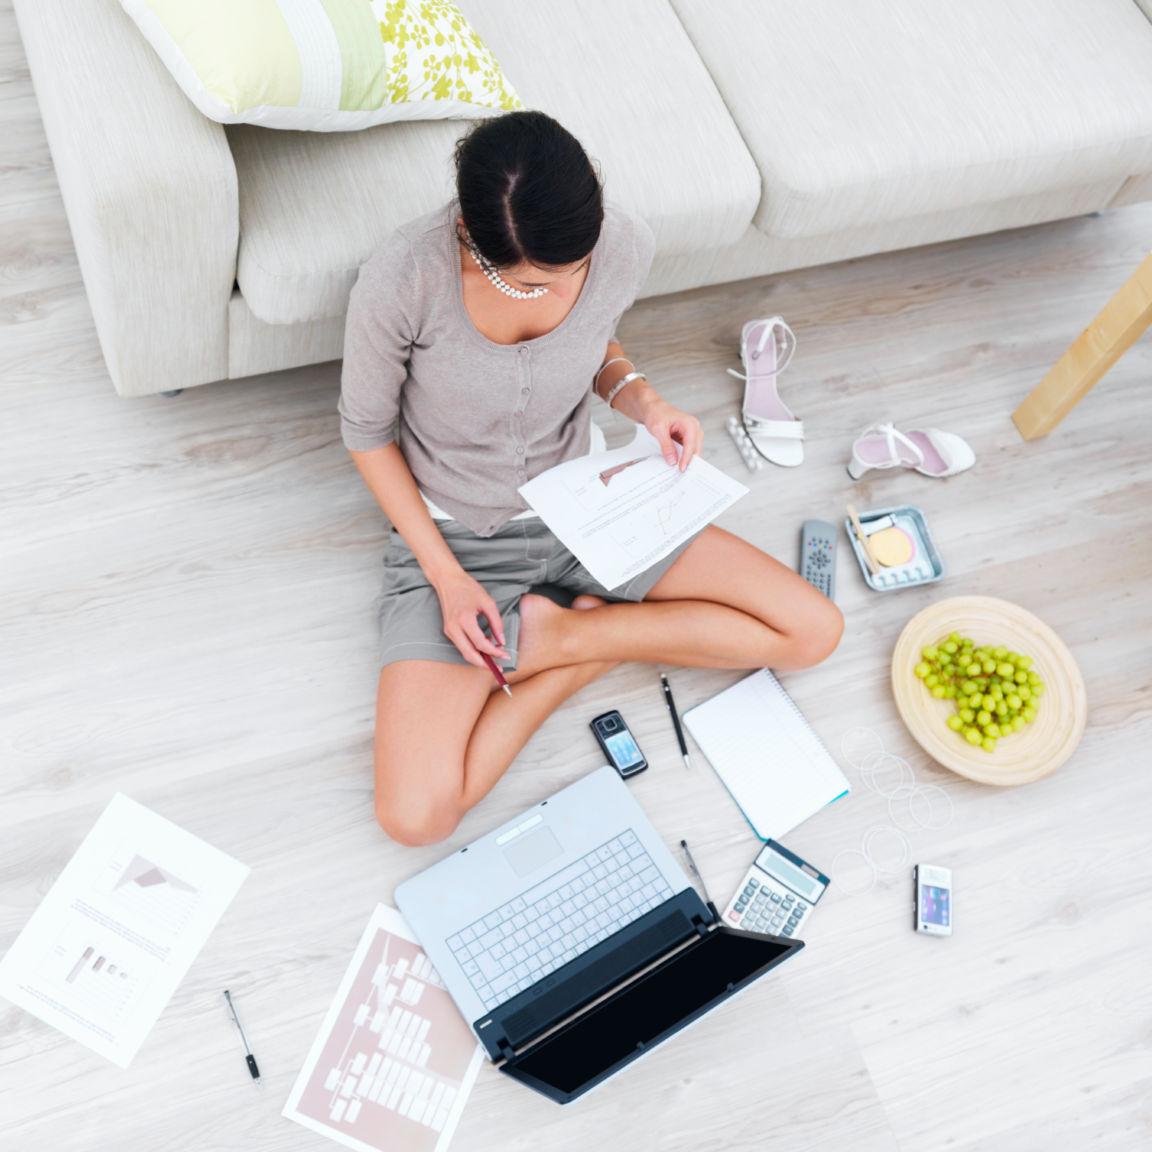 Business woman sitting in house with laptopbeside sofa 146789166 6208x5405